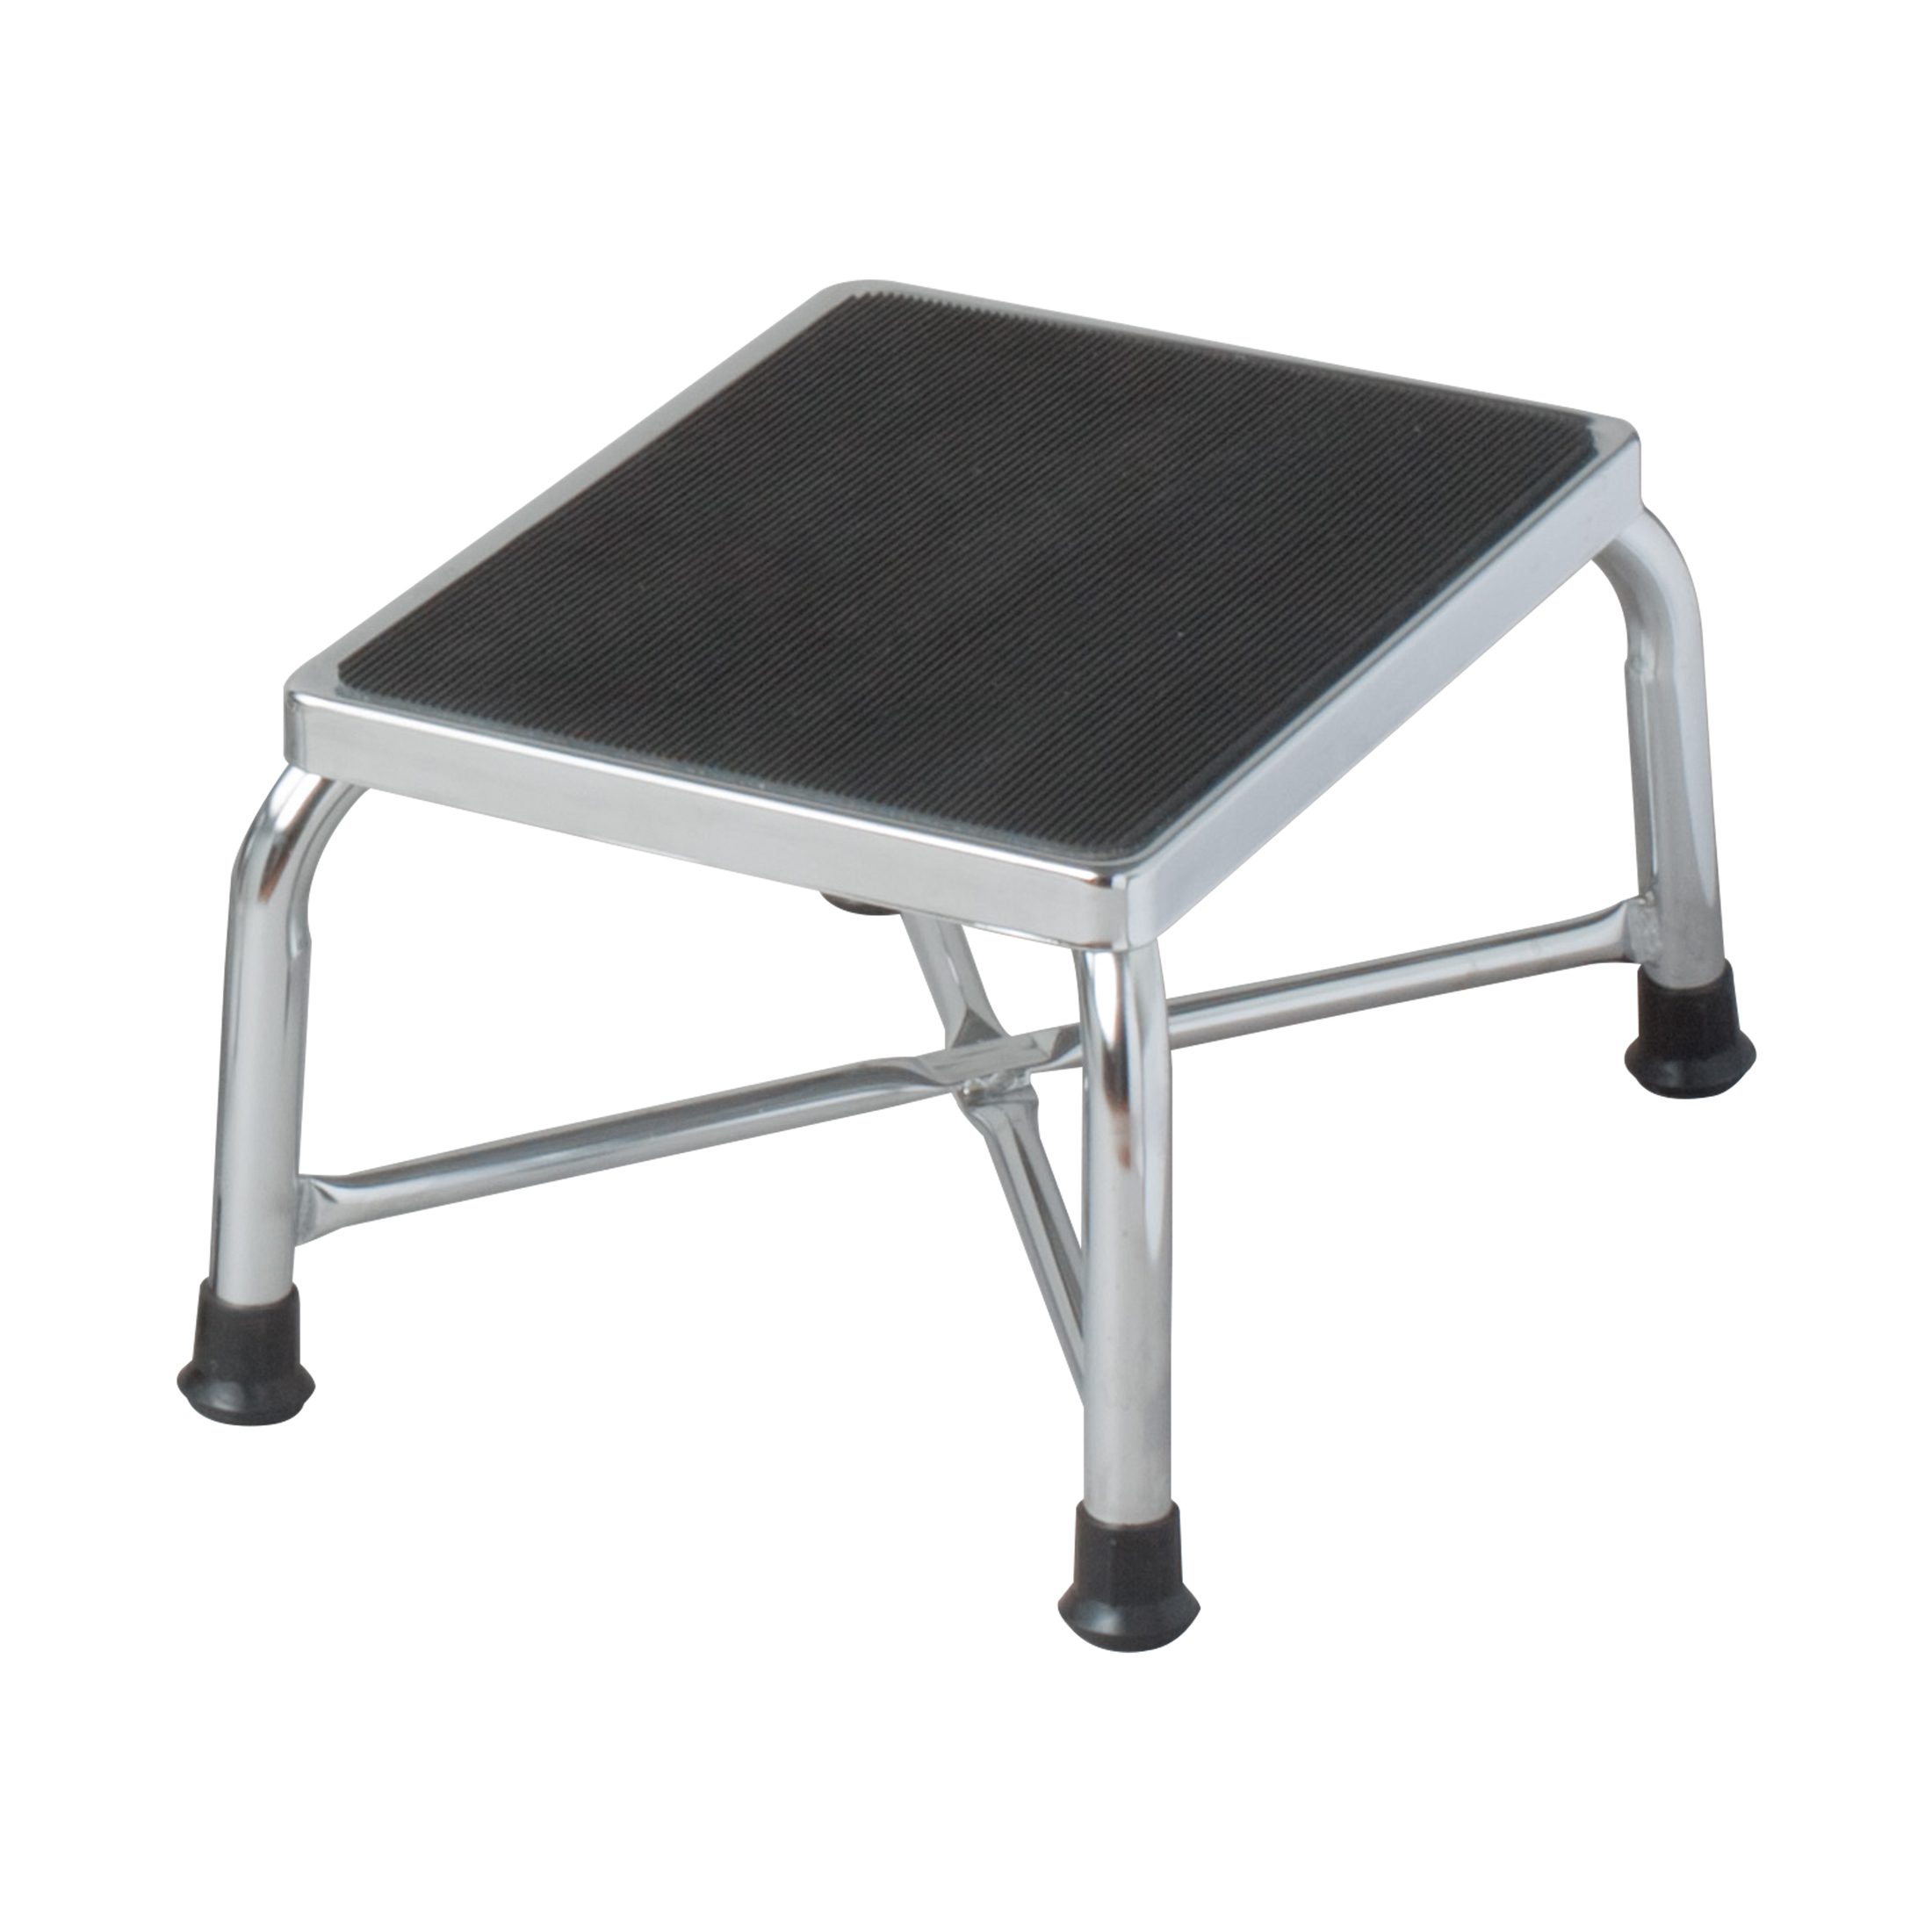 Foot Stools Products, Supplies and Equipment